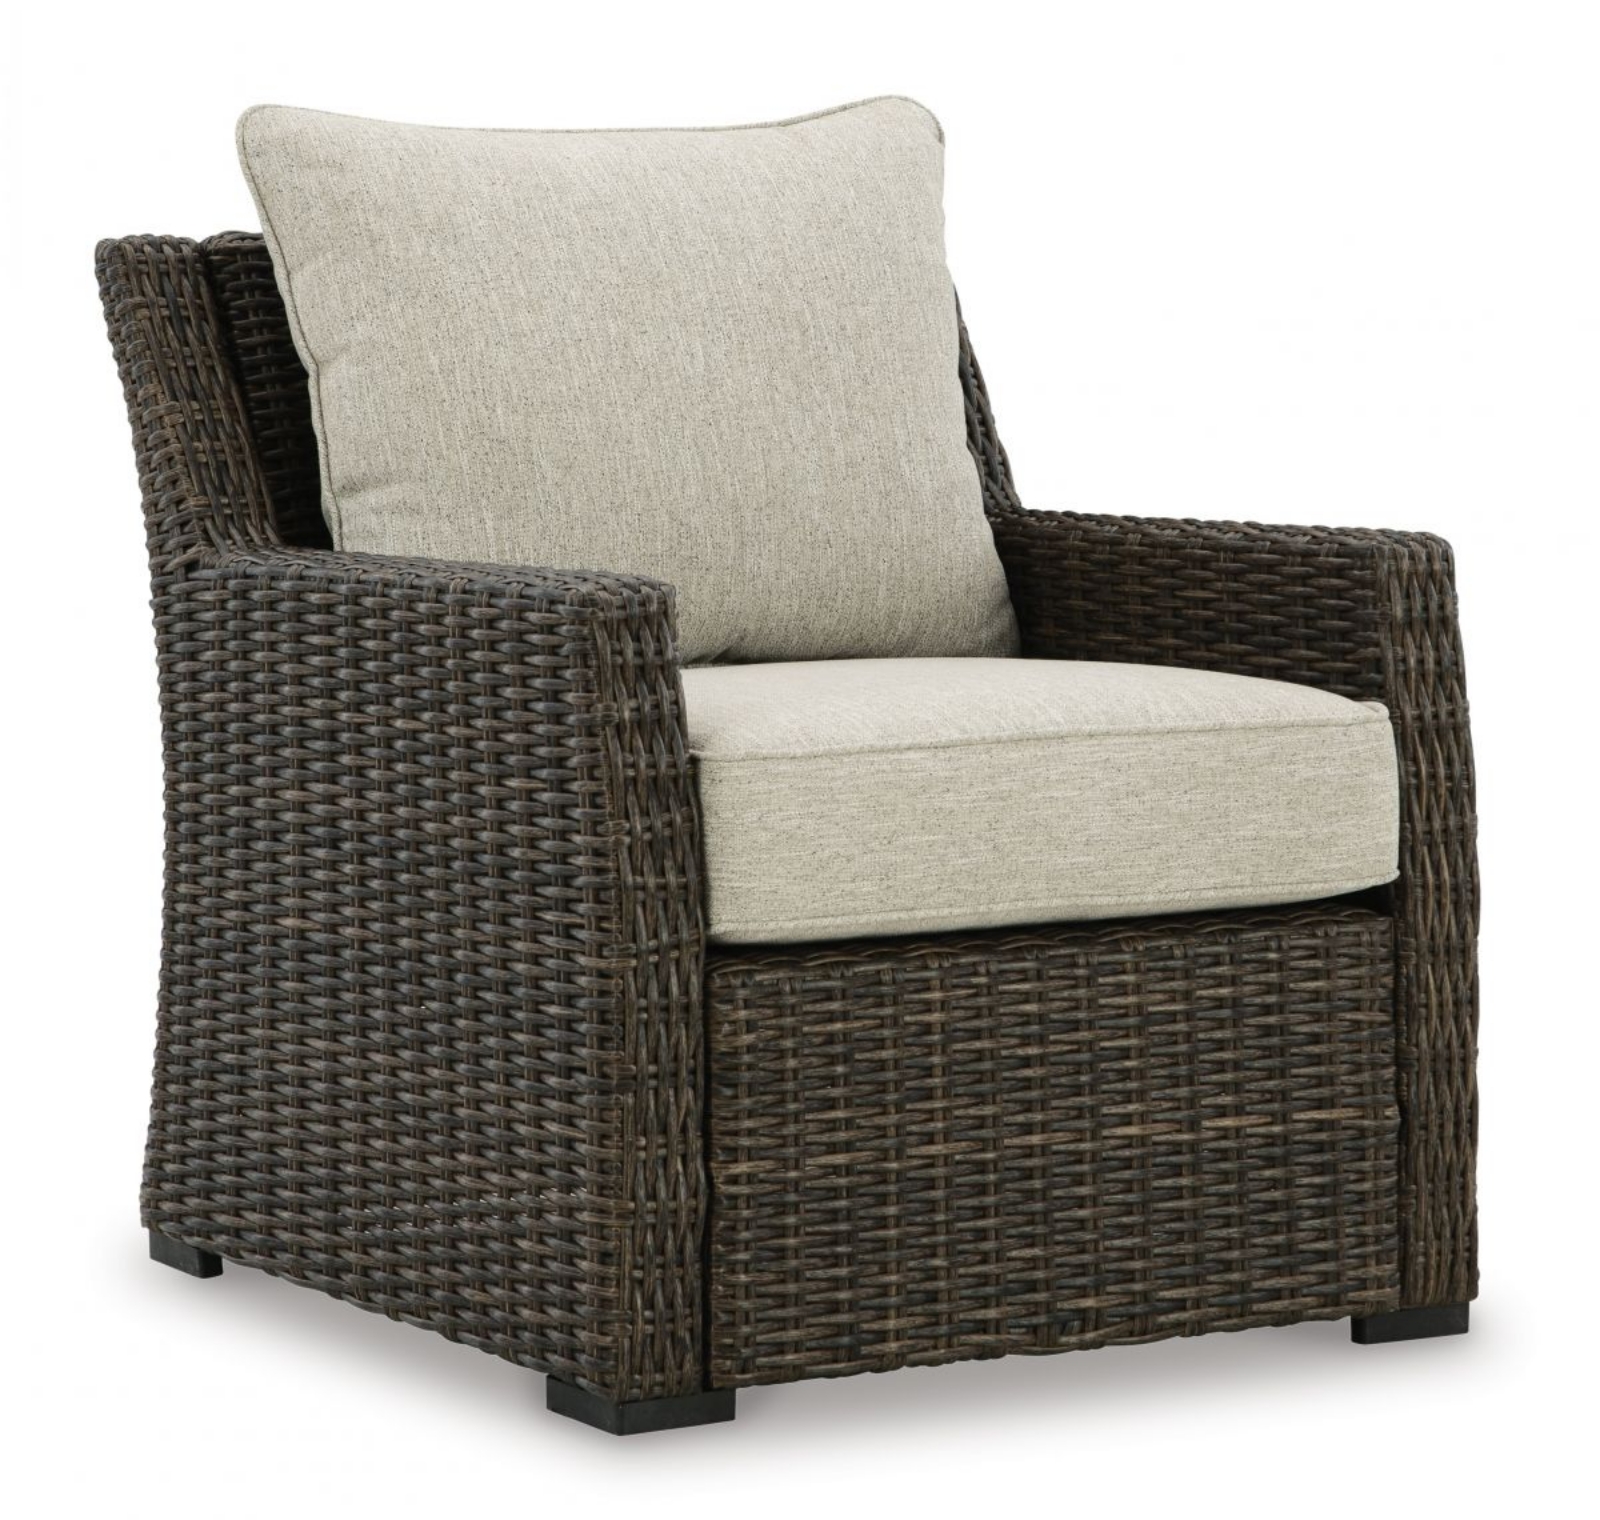 Picture of Brook Ranch Outdoor Chair